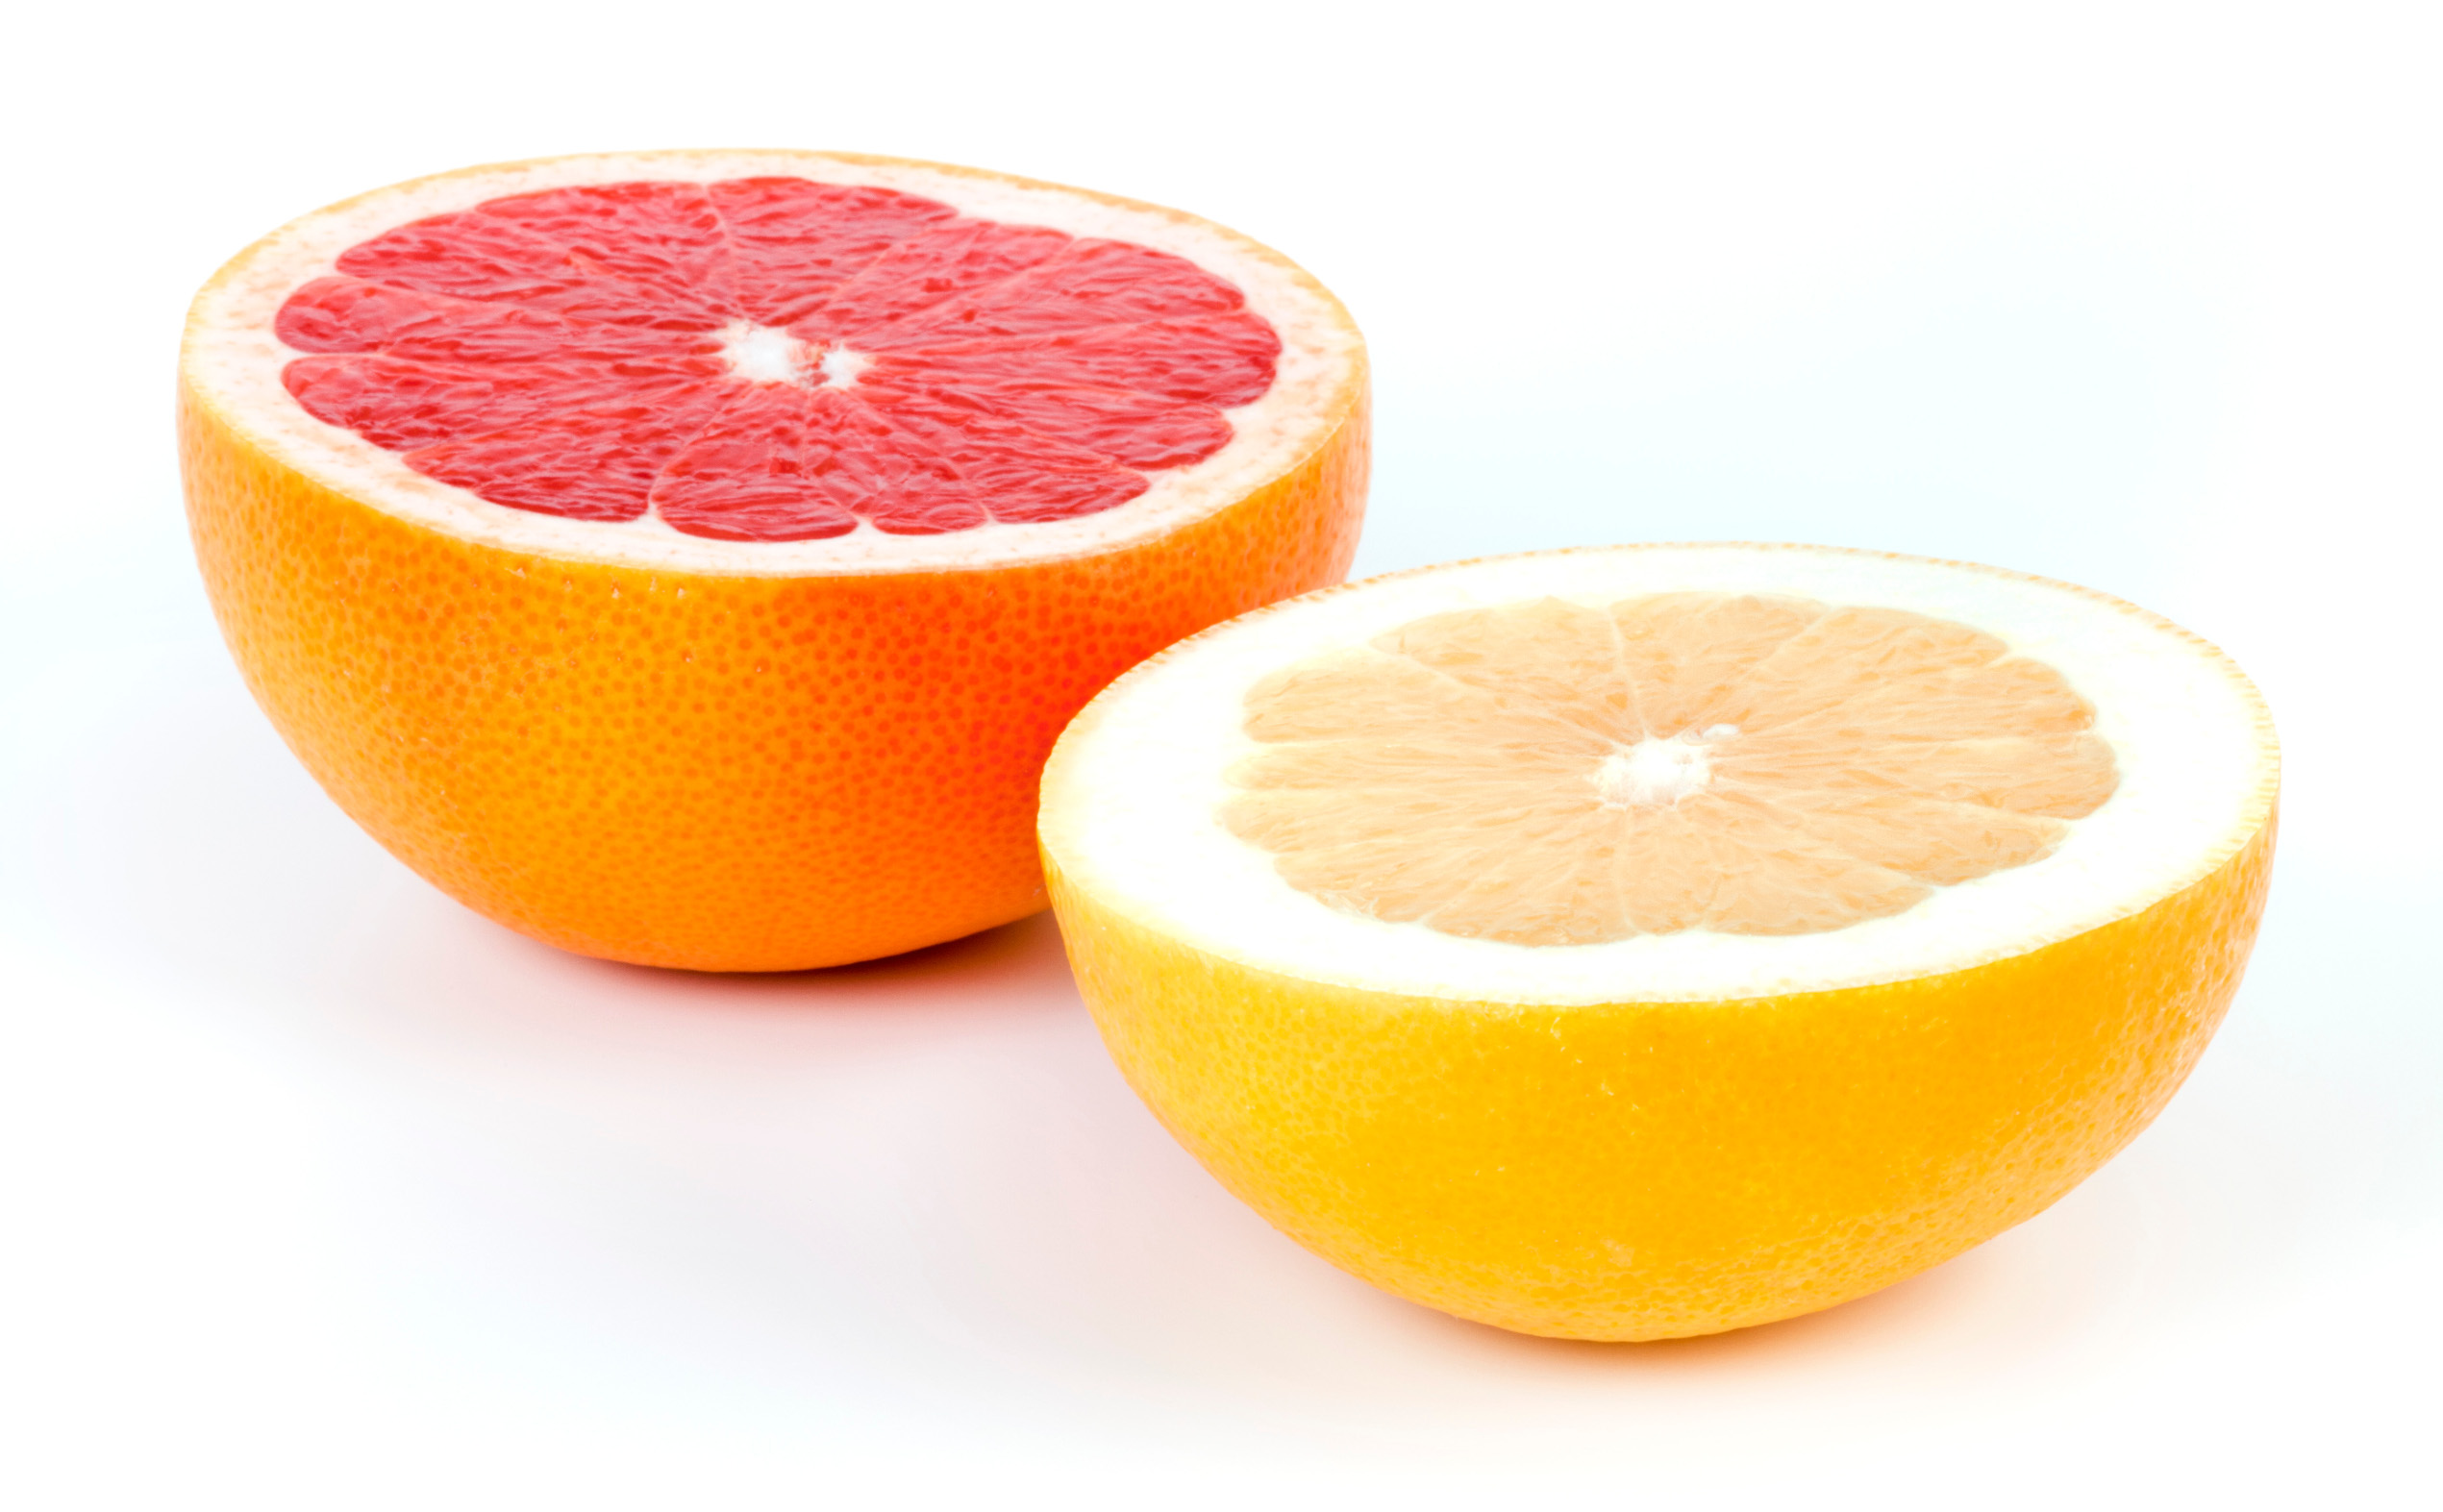 Halves of white and red Grapefruits isolated on white background.